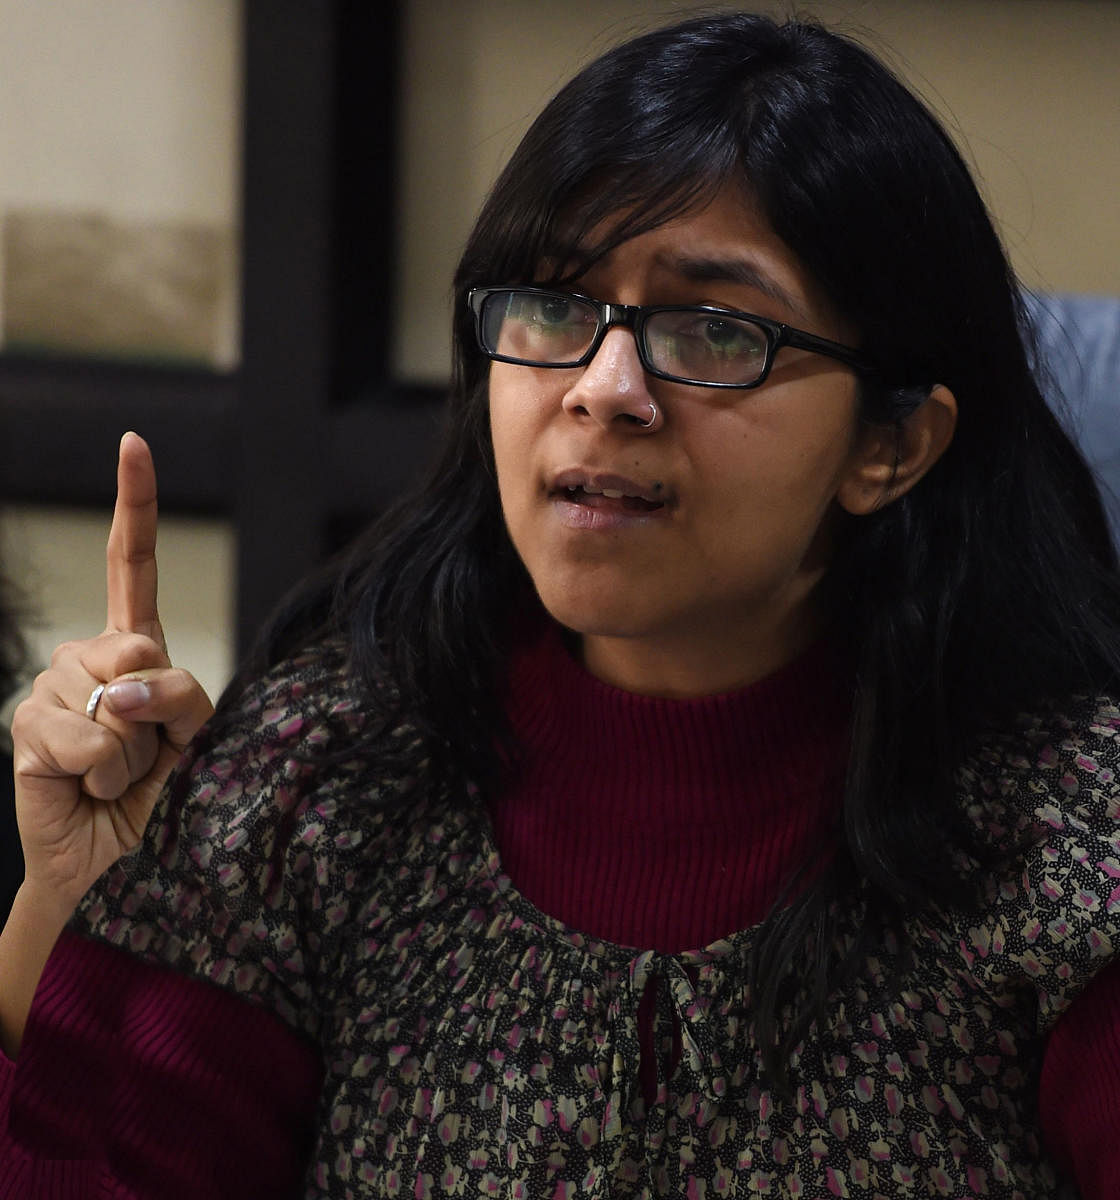 DCW chief Swati Maliwal also met the journalist at AIIMS, where she is undergoing treatment. (AFP File Photo)